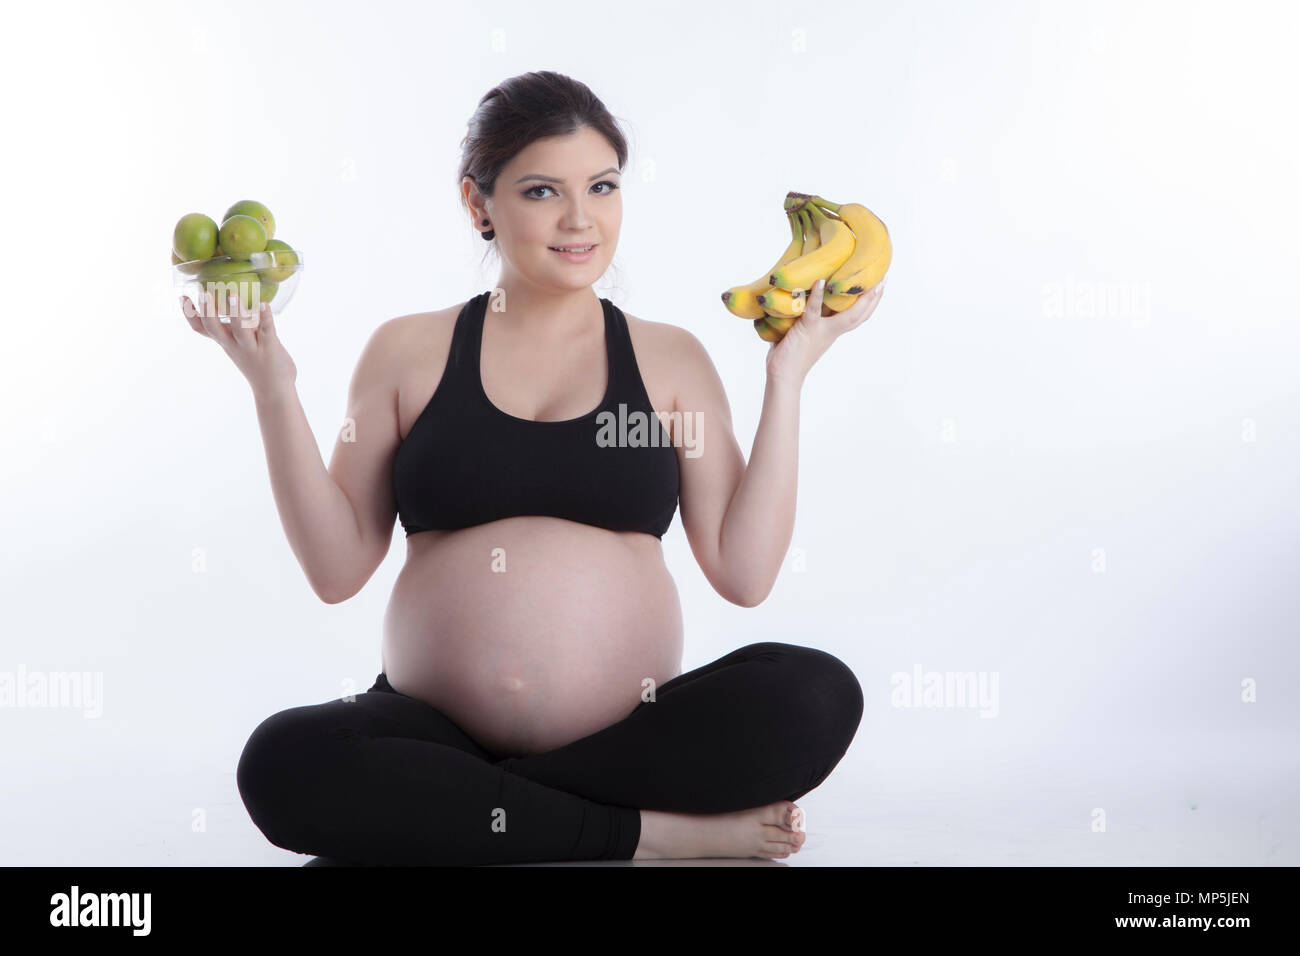 Healthy pregnant woman eating vitamin rich fruit over white background Stock Photo